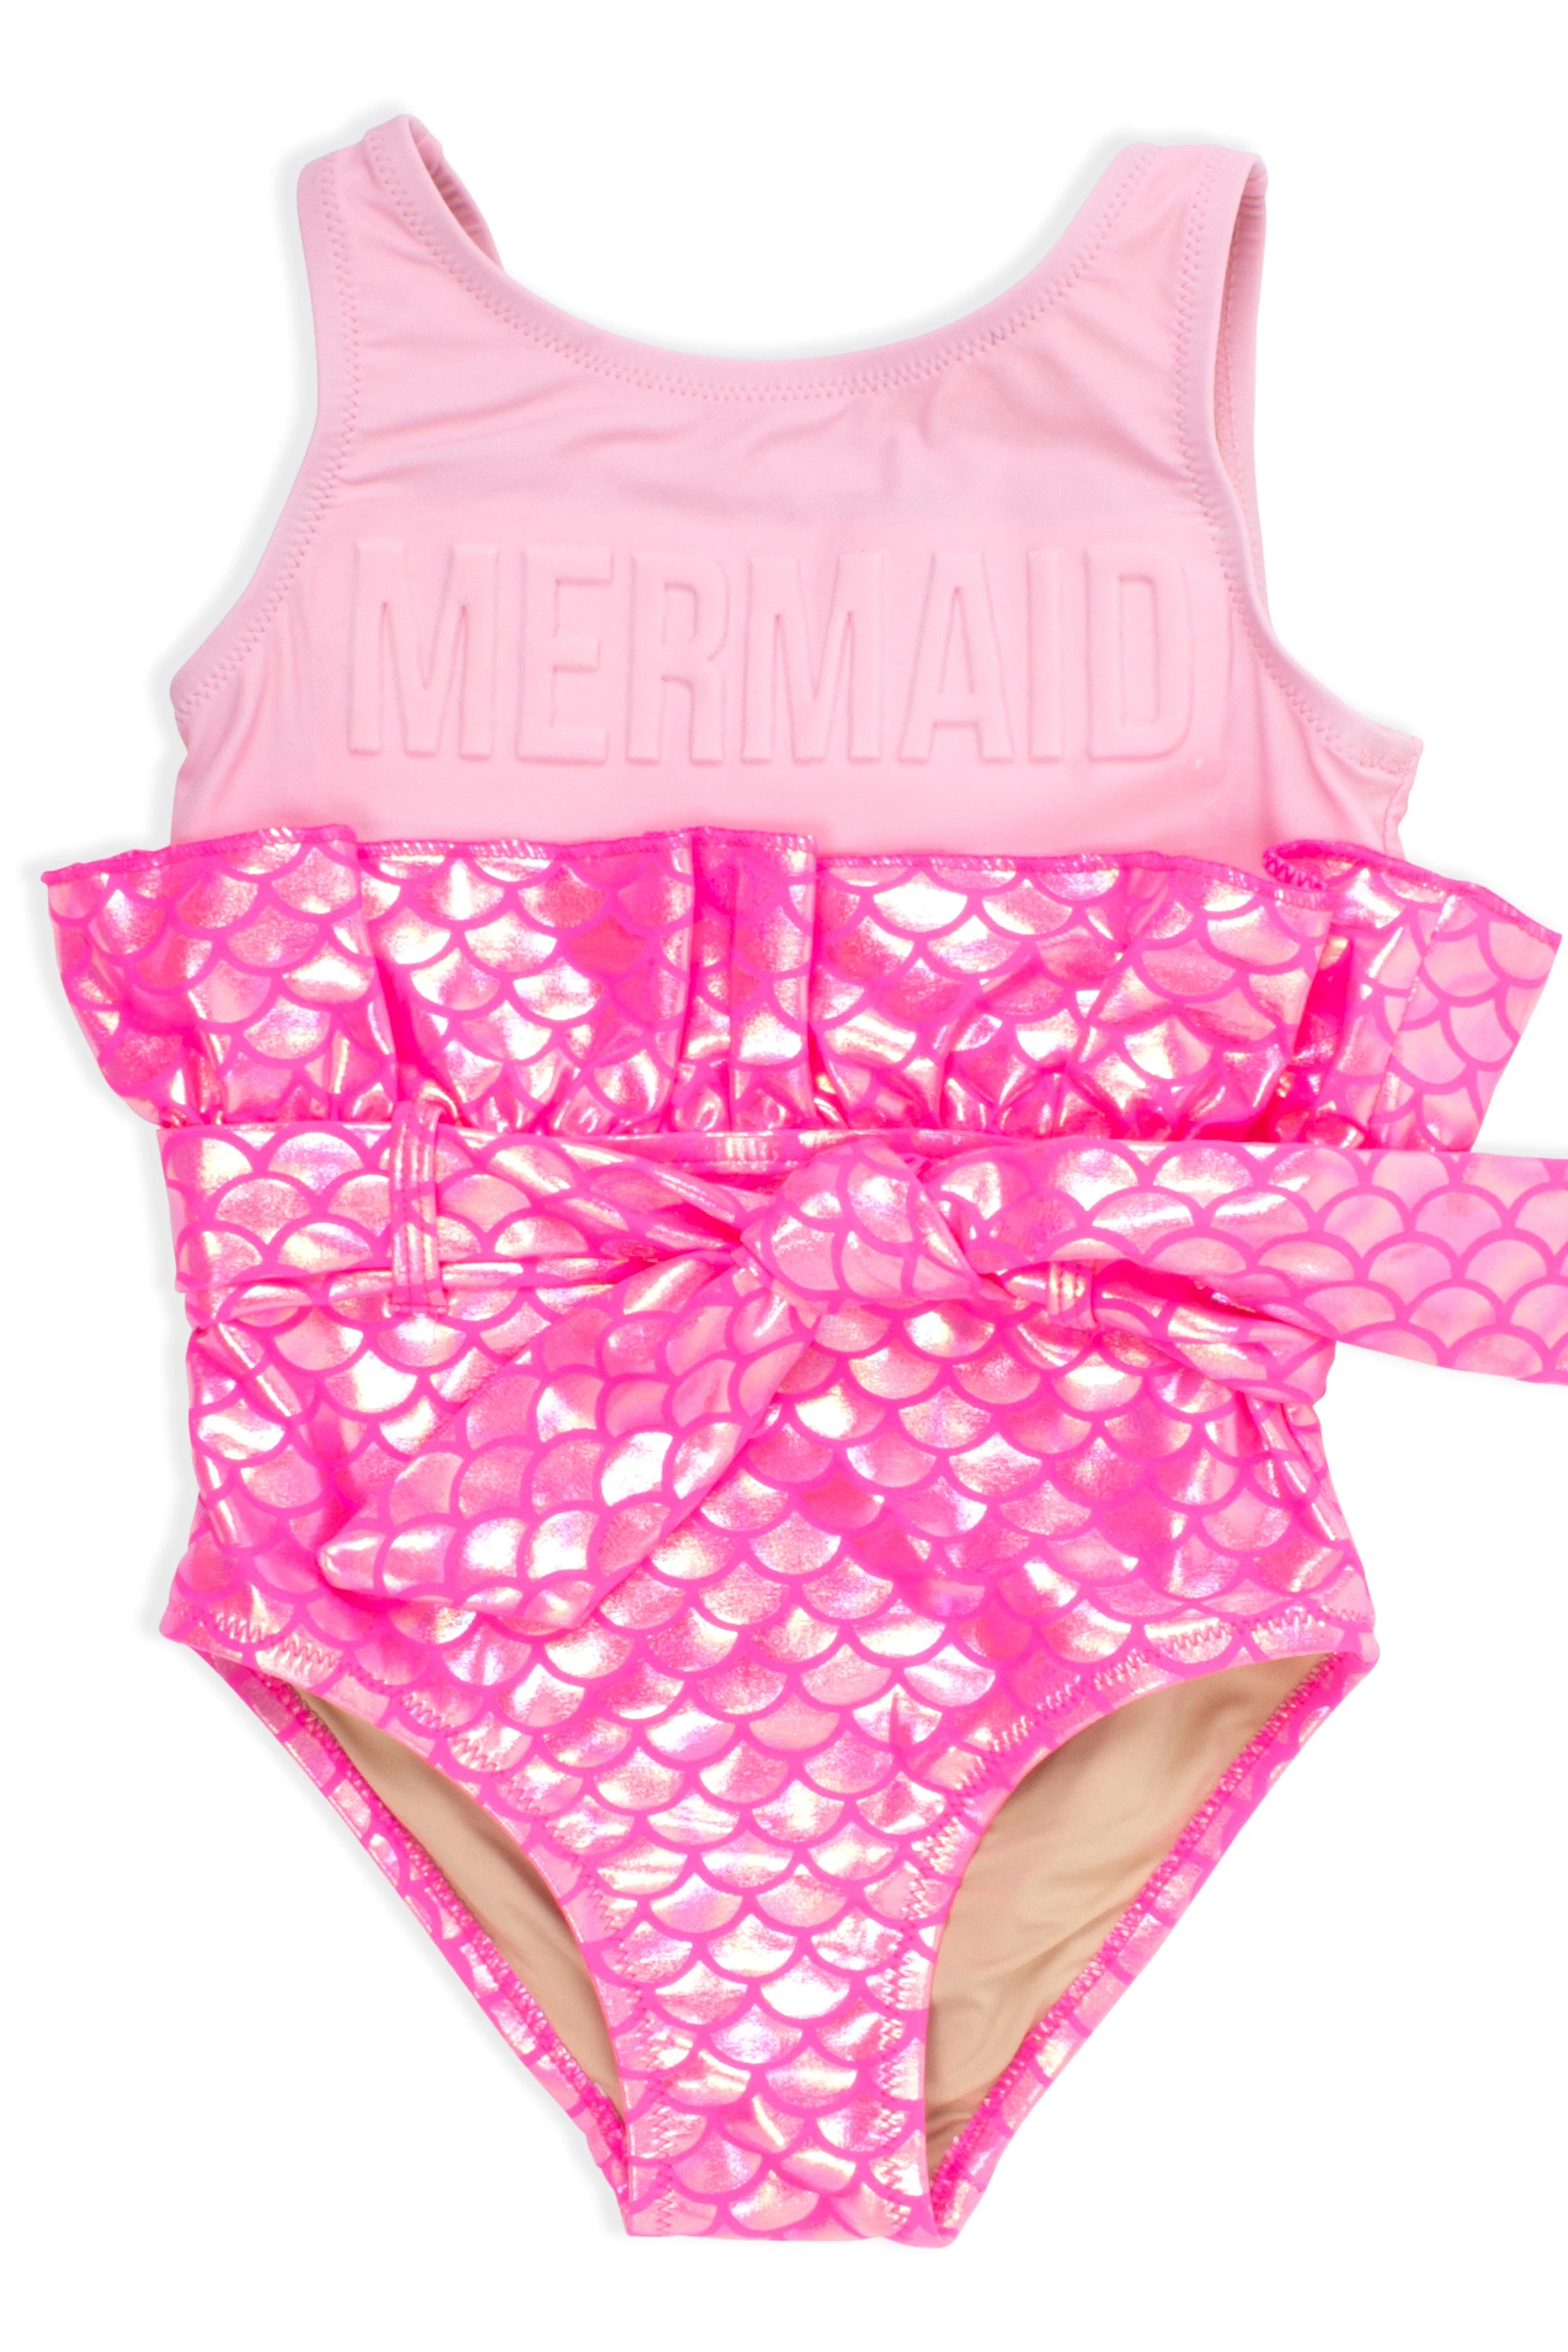 One Piece Mermaid Scale - Hot Pink